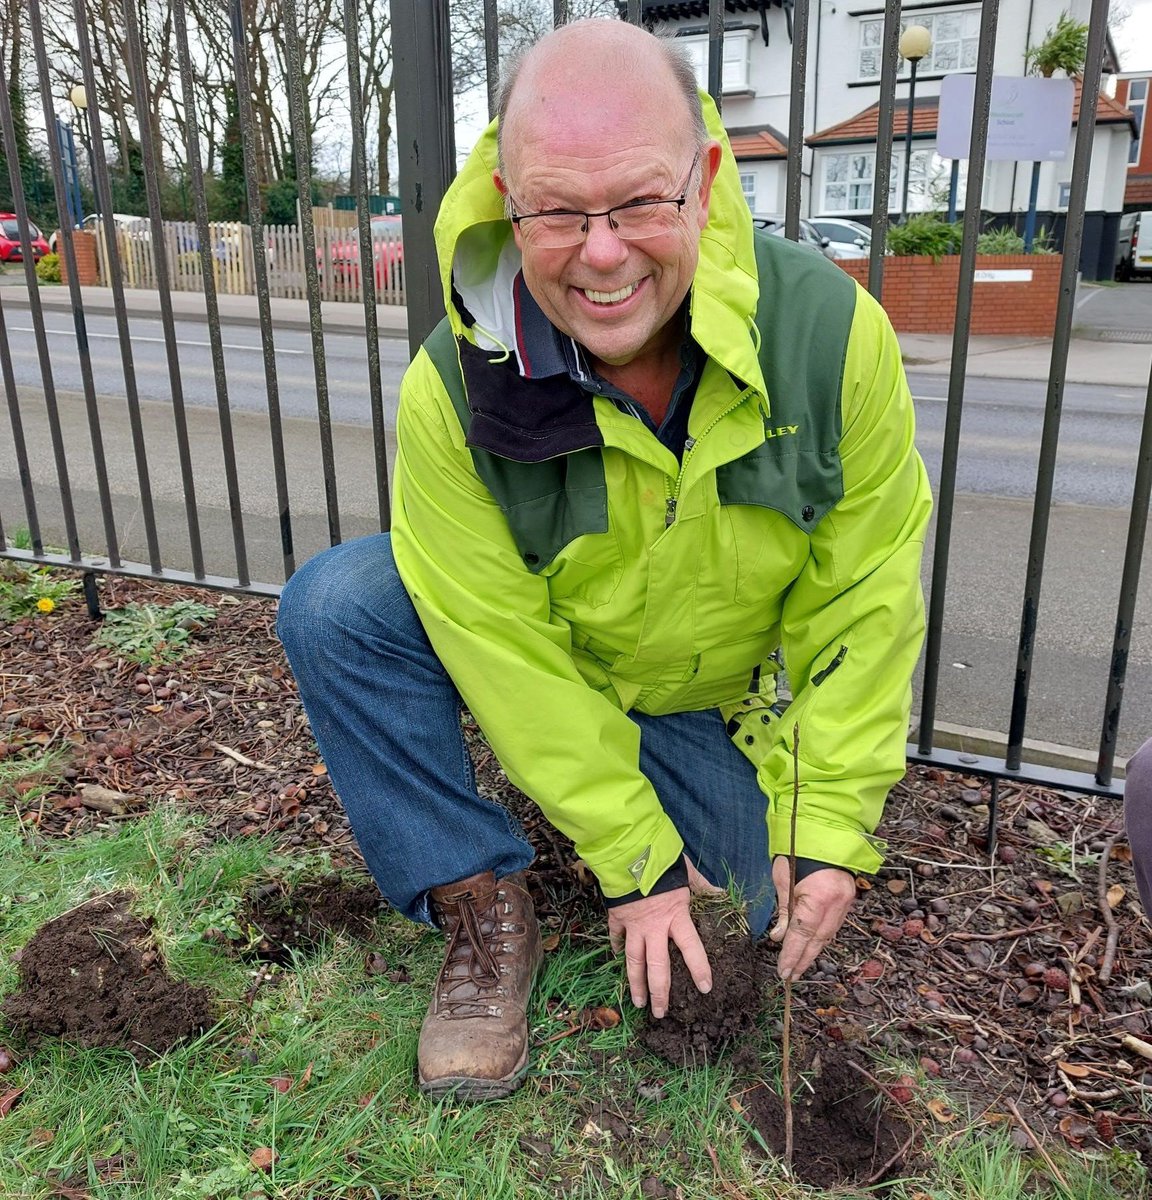 🌳 We recently planted 4,000 trees at Pinderfields Hospital in one of the biggest new hedgerow planting initiatives undertaken by any public sector organisation in the UK for many years, helping to provide a host of sustainability and wildlife benefits ➡️ bit.ly/MYtreeplanting